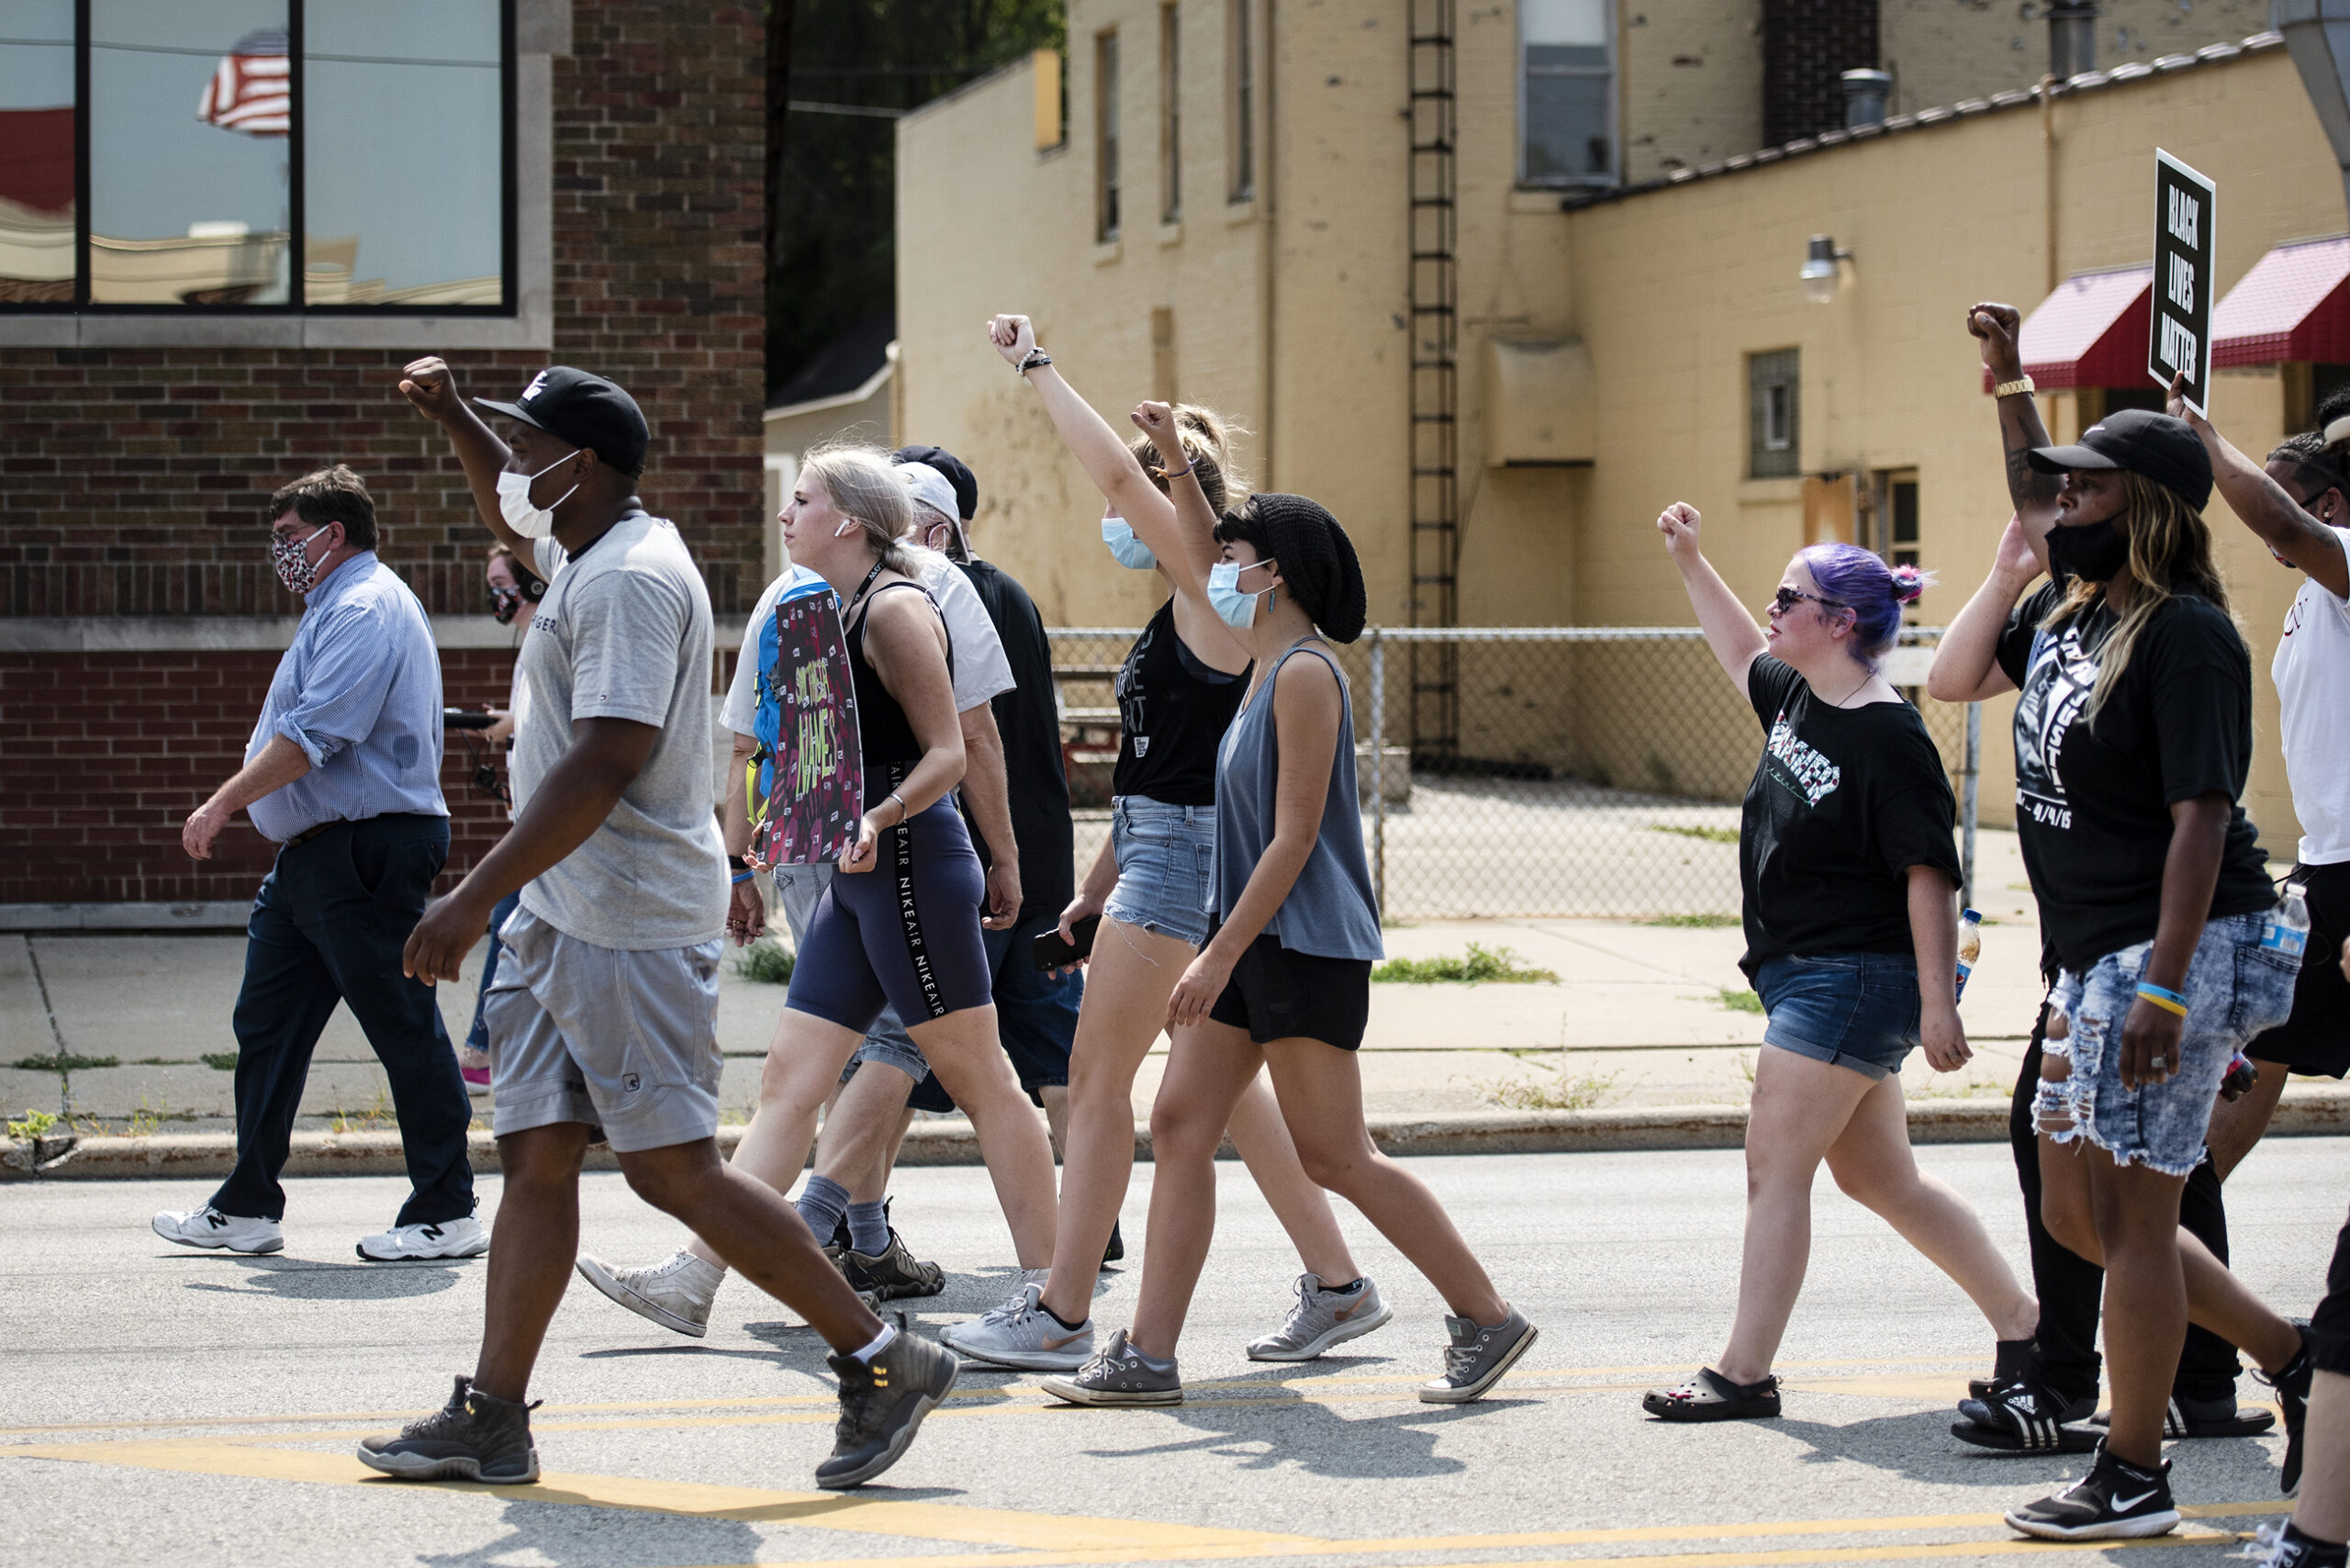 A group of protesters raise their fists as they march in the street